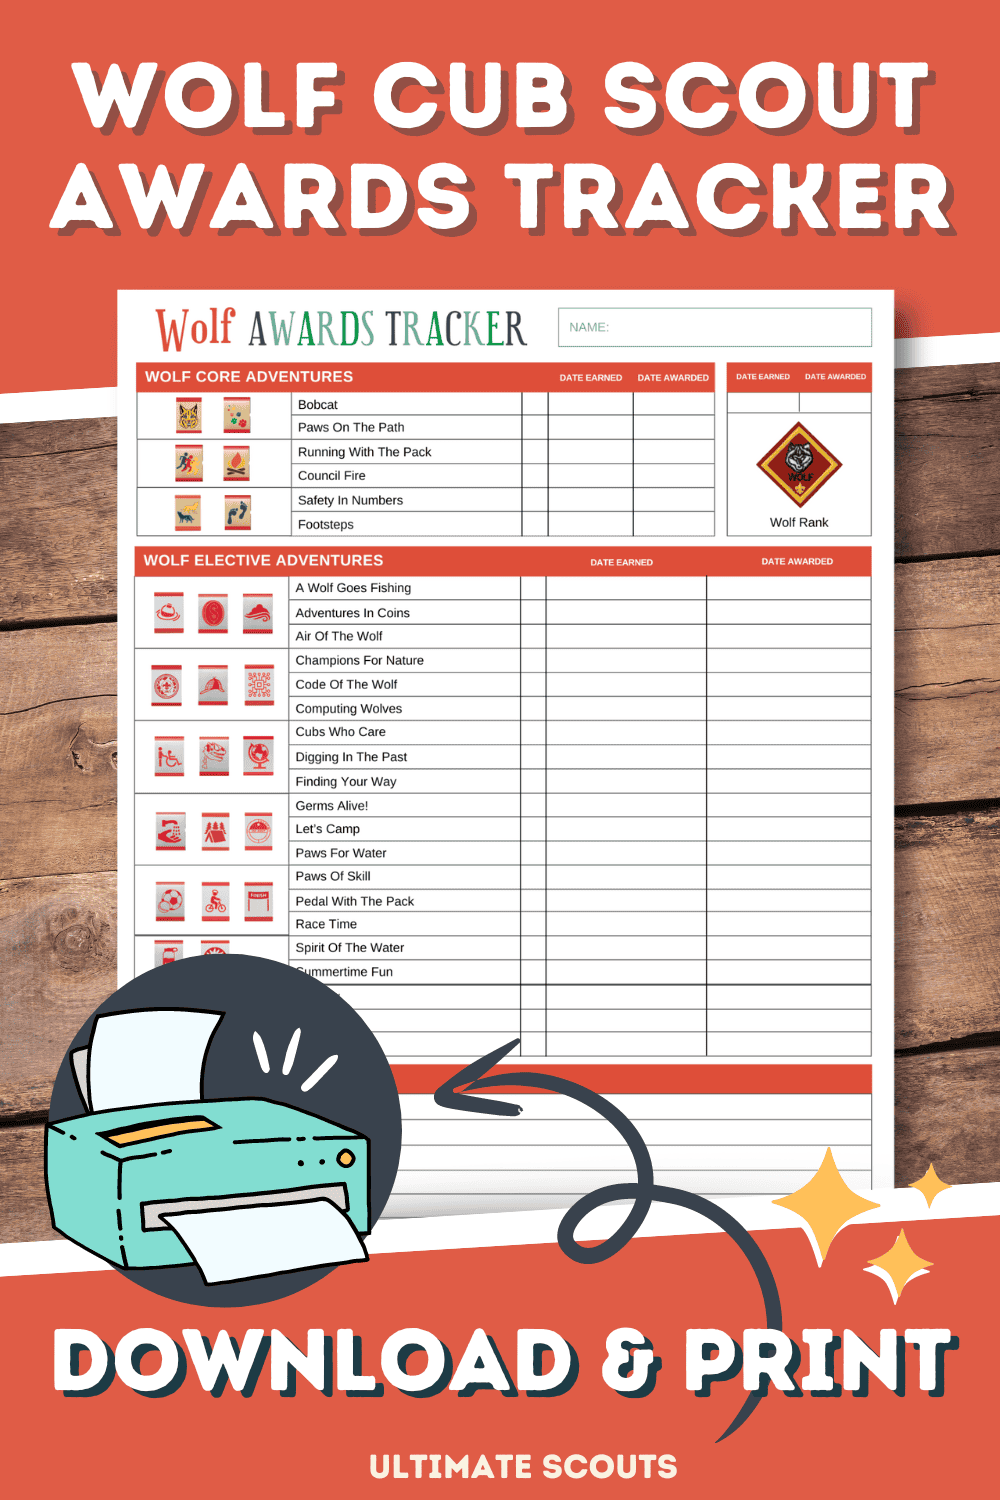 Wolf Cub Scout Awards Tracker Checklist Printable